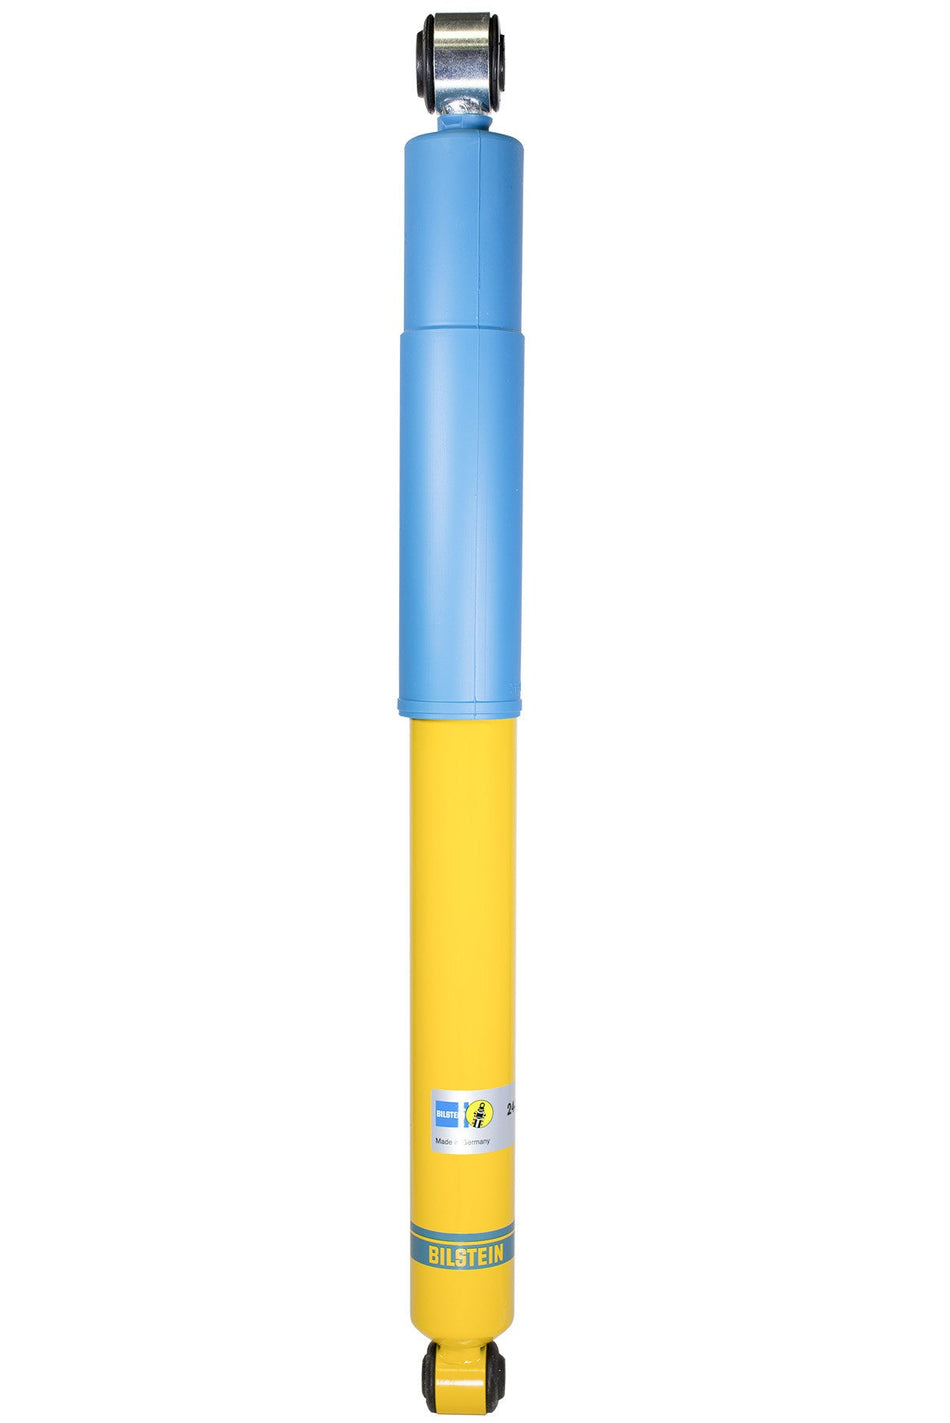 Bilstein Front B6 Shock for Land Rover Discovery 2 (1998-2004) (Heavy Duty)